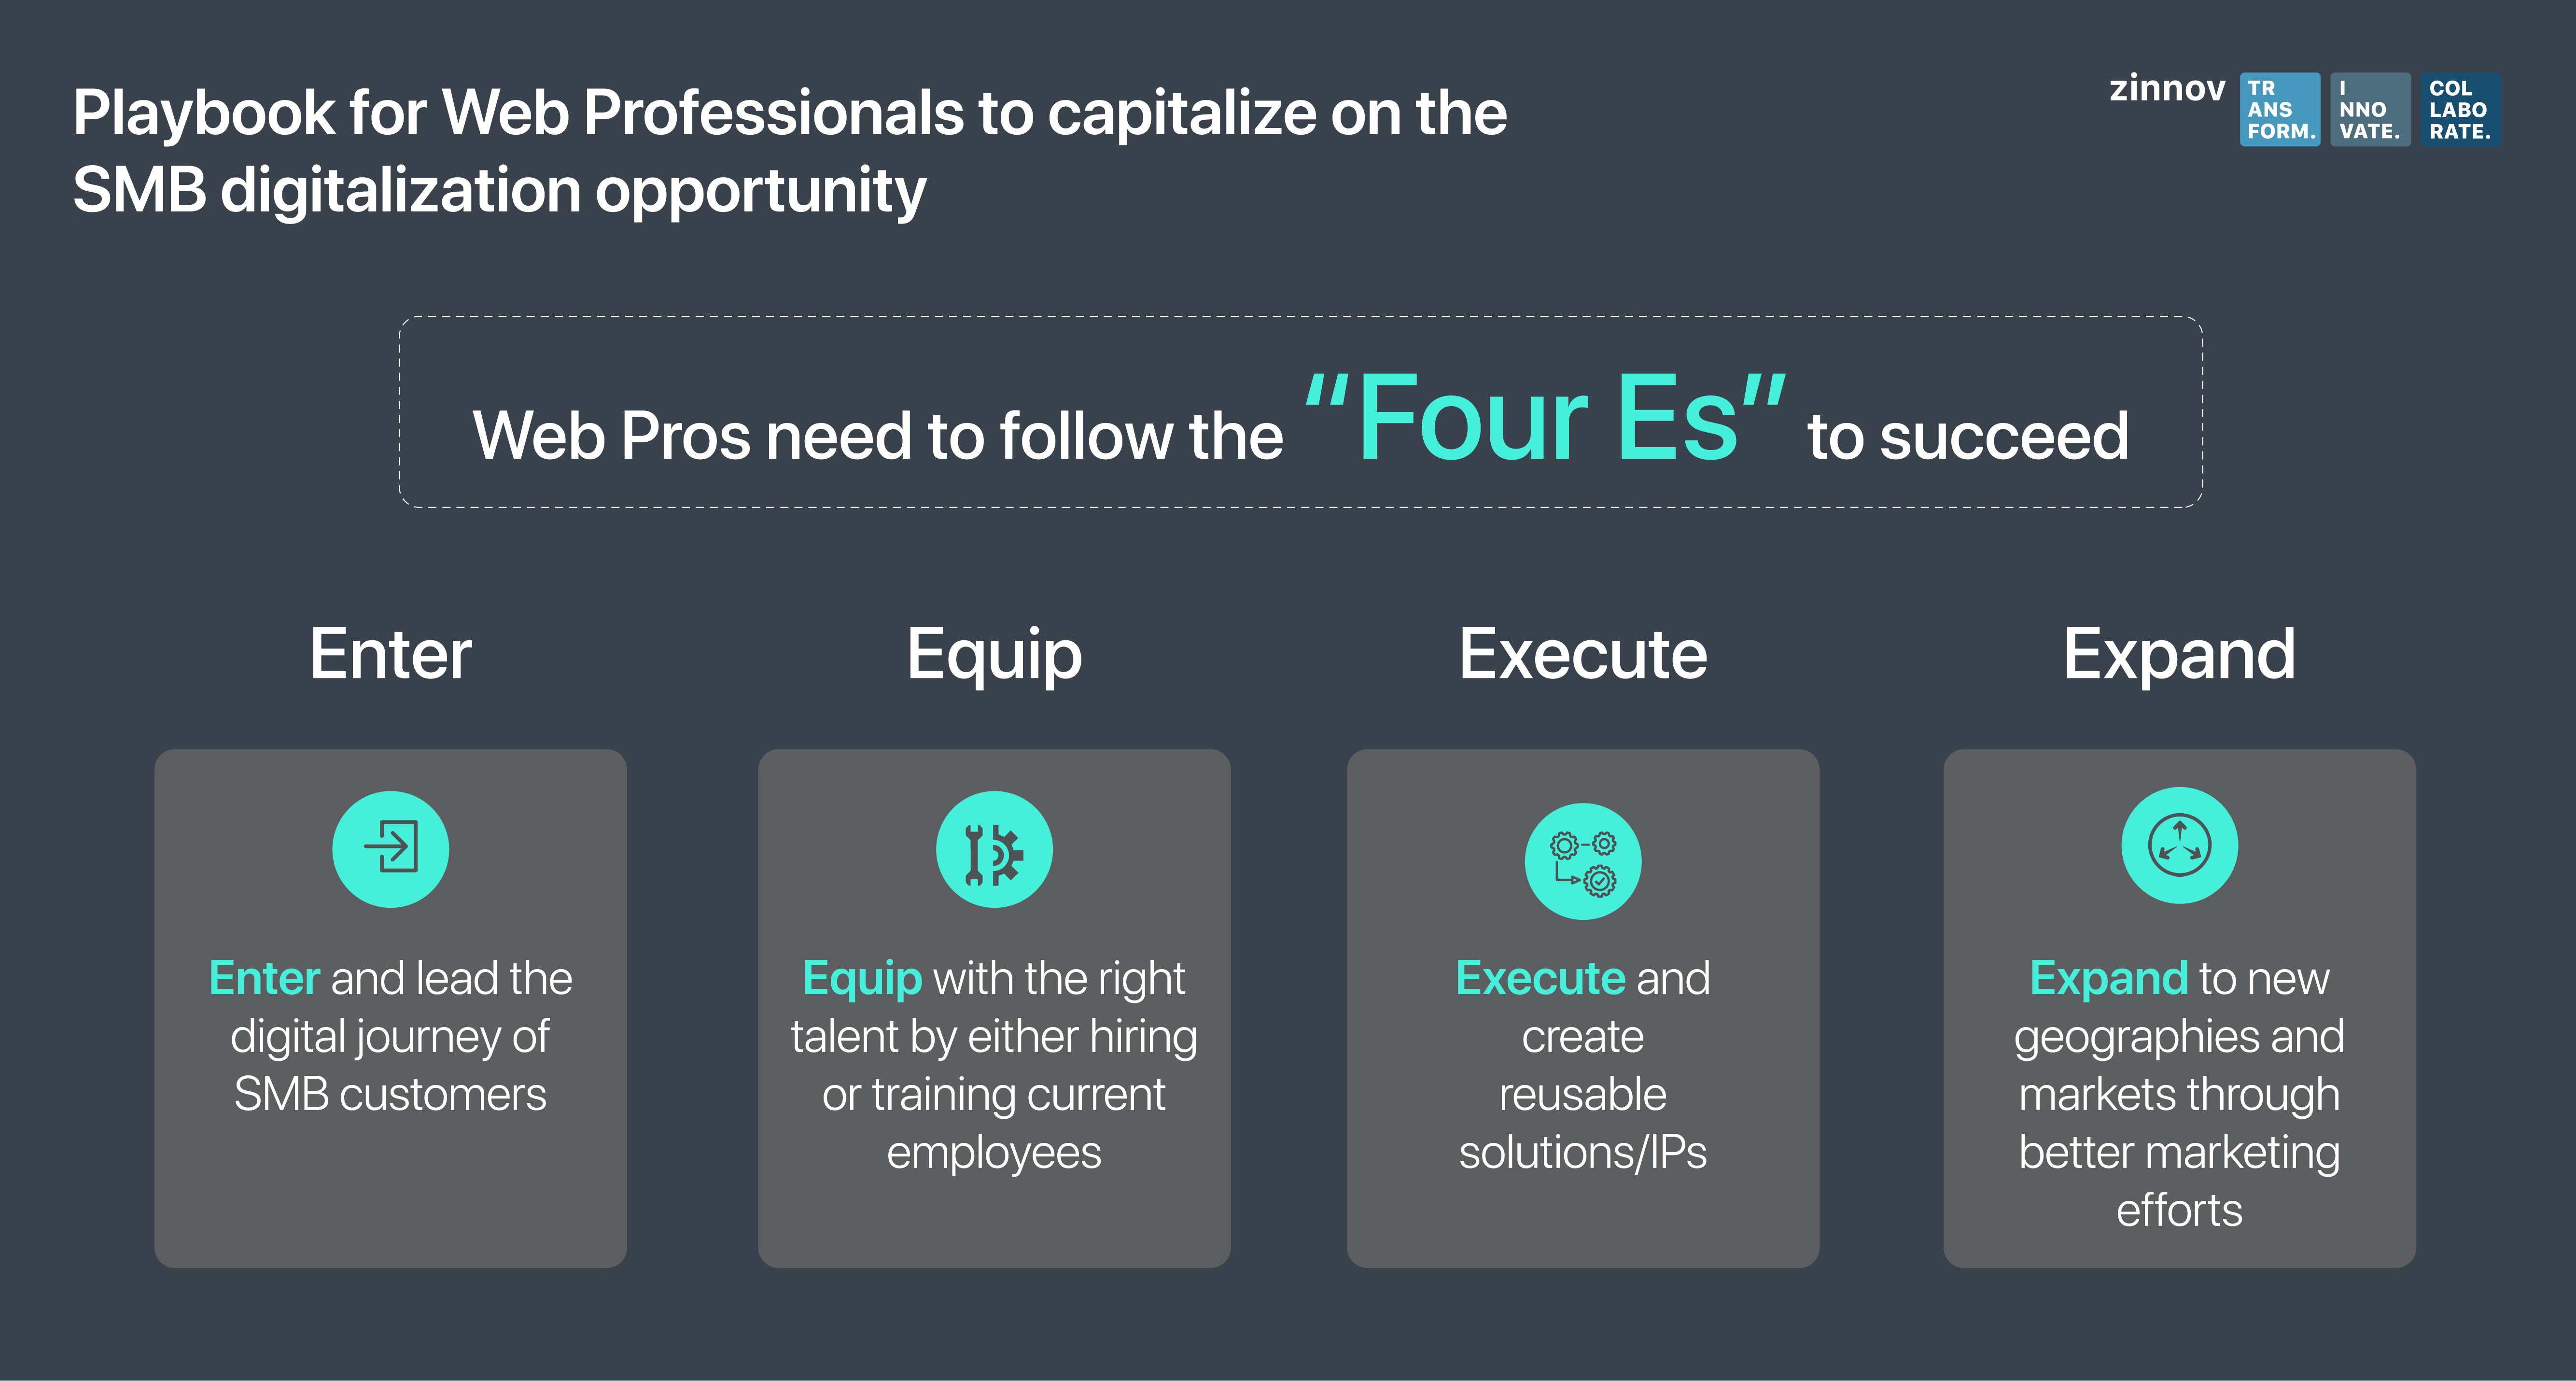 web pros need to follow the 4E approach